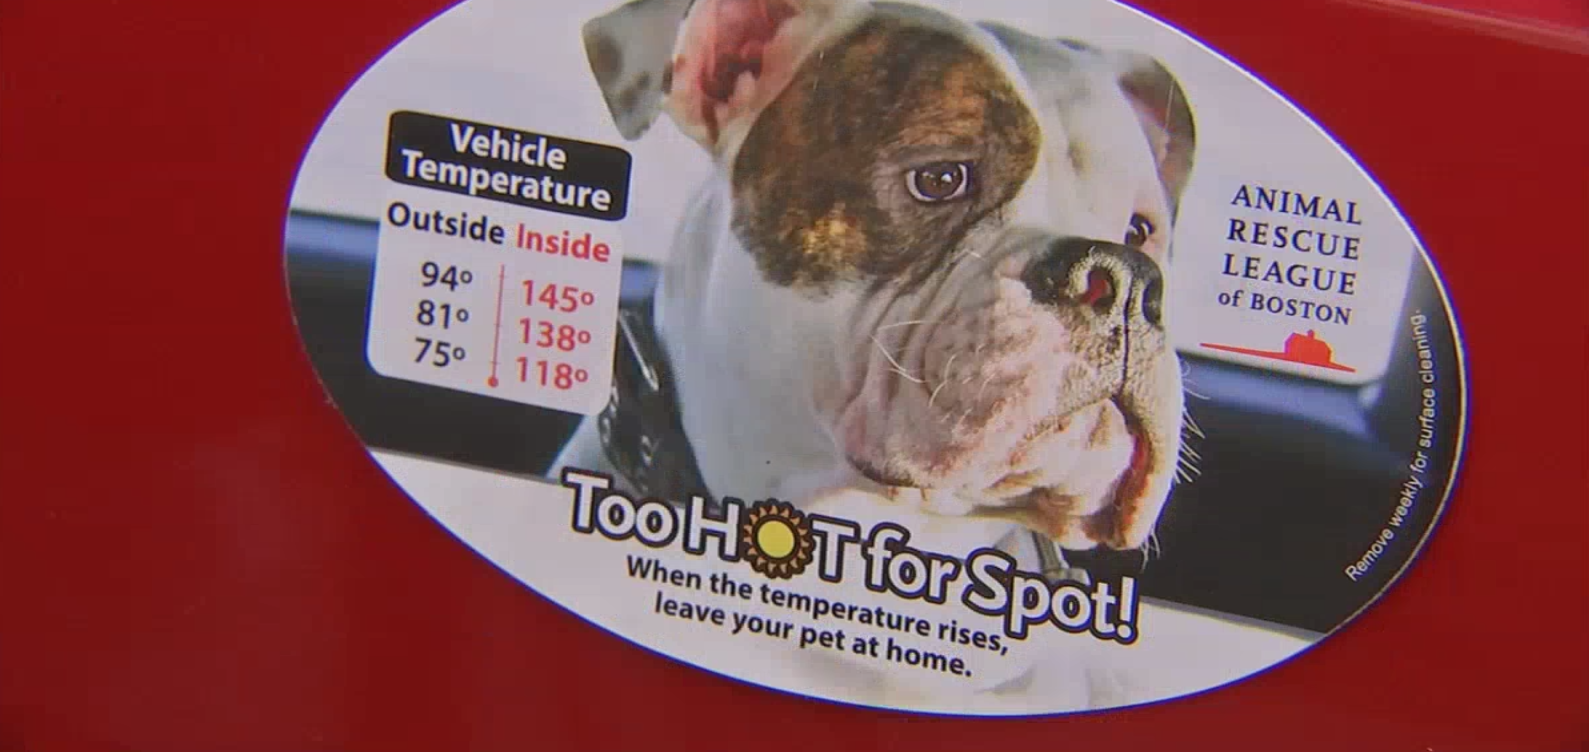 Too Hot for Spot': Animal Rescue League warns pet owners about the dangers  of hot cars – Boston 25 News